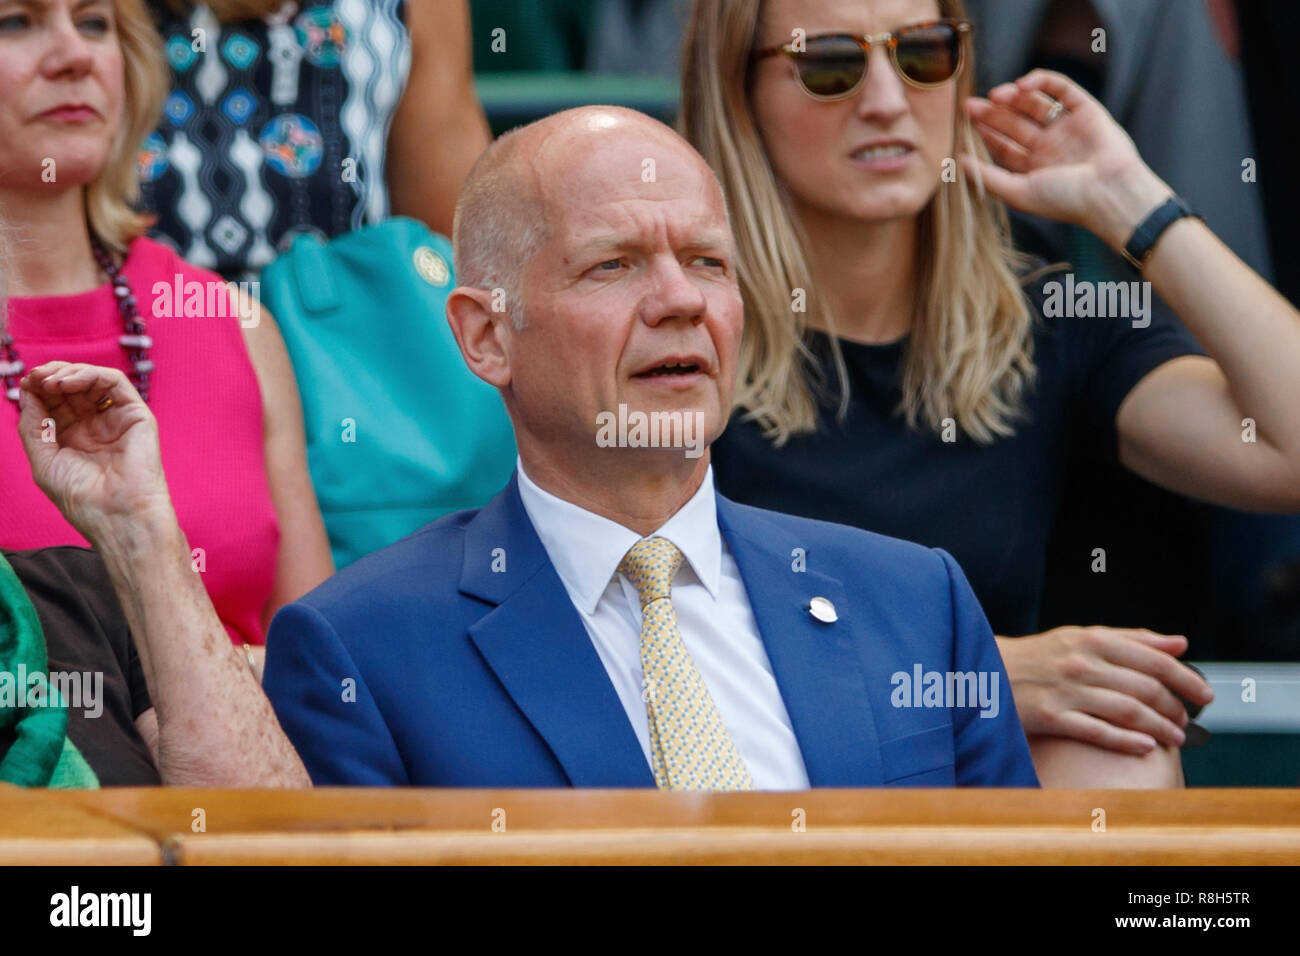 Politician William Hague watches during the Wimbledon Championships 2018 Stock Photo